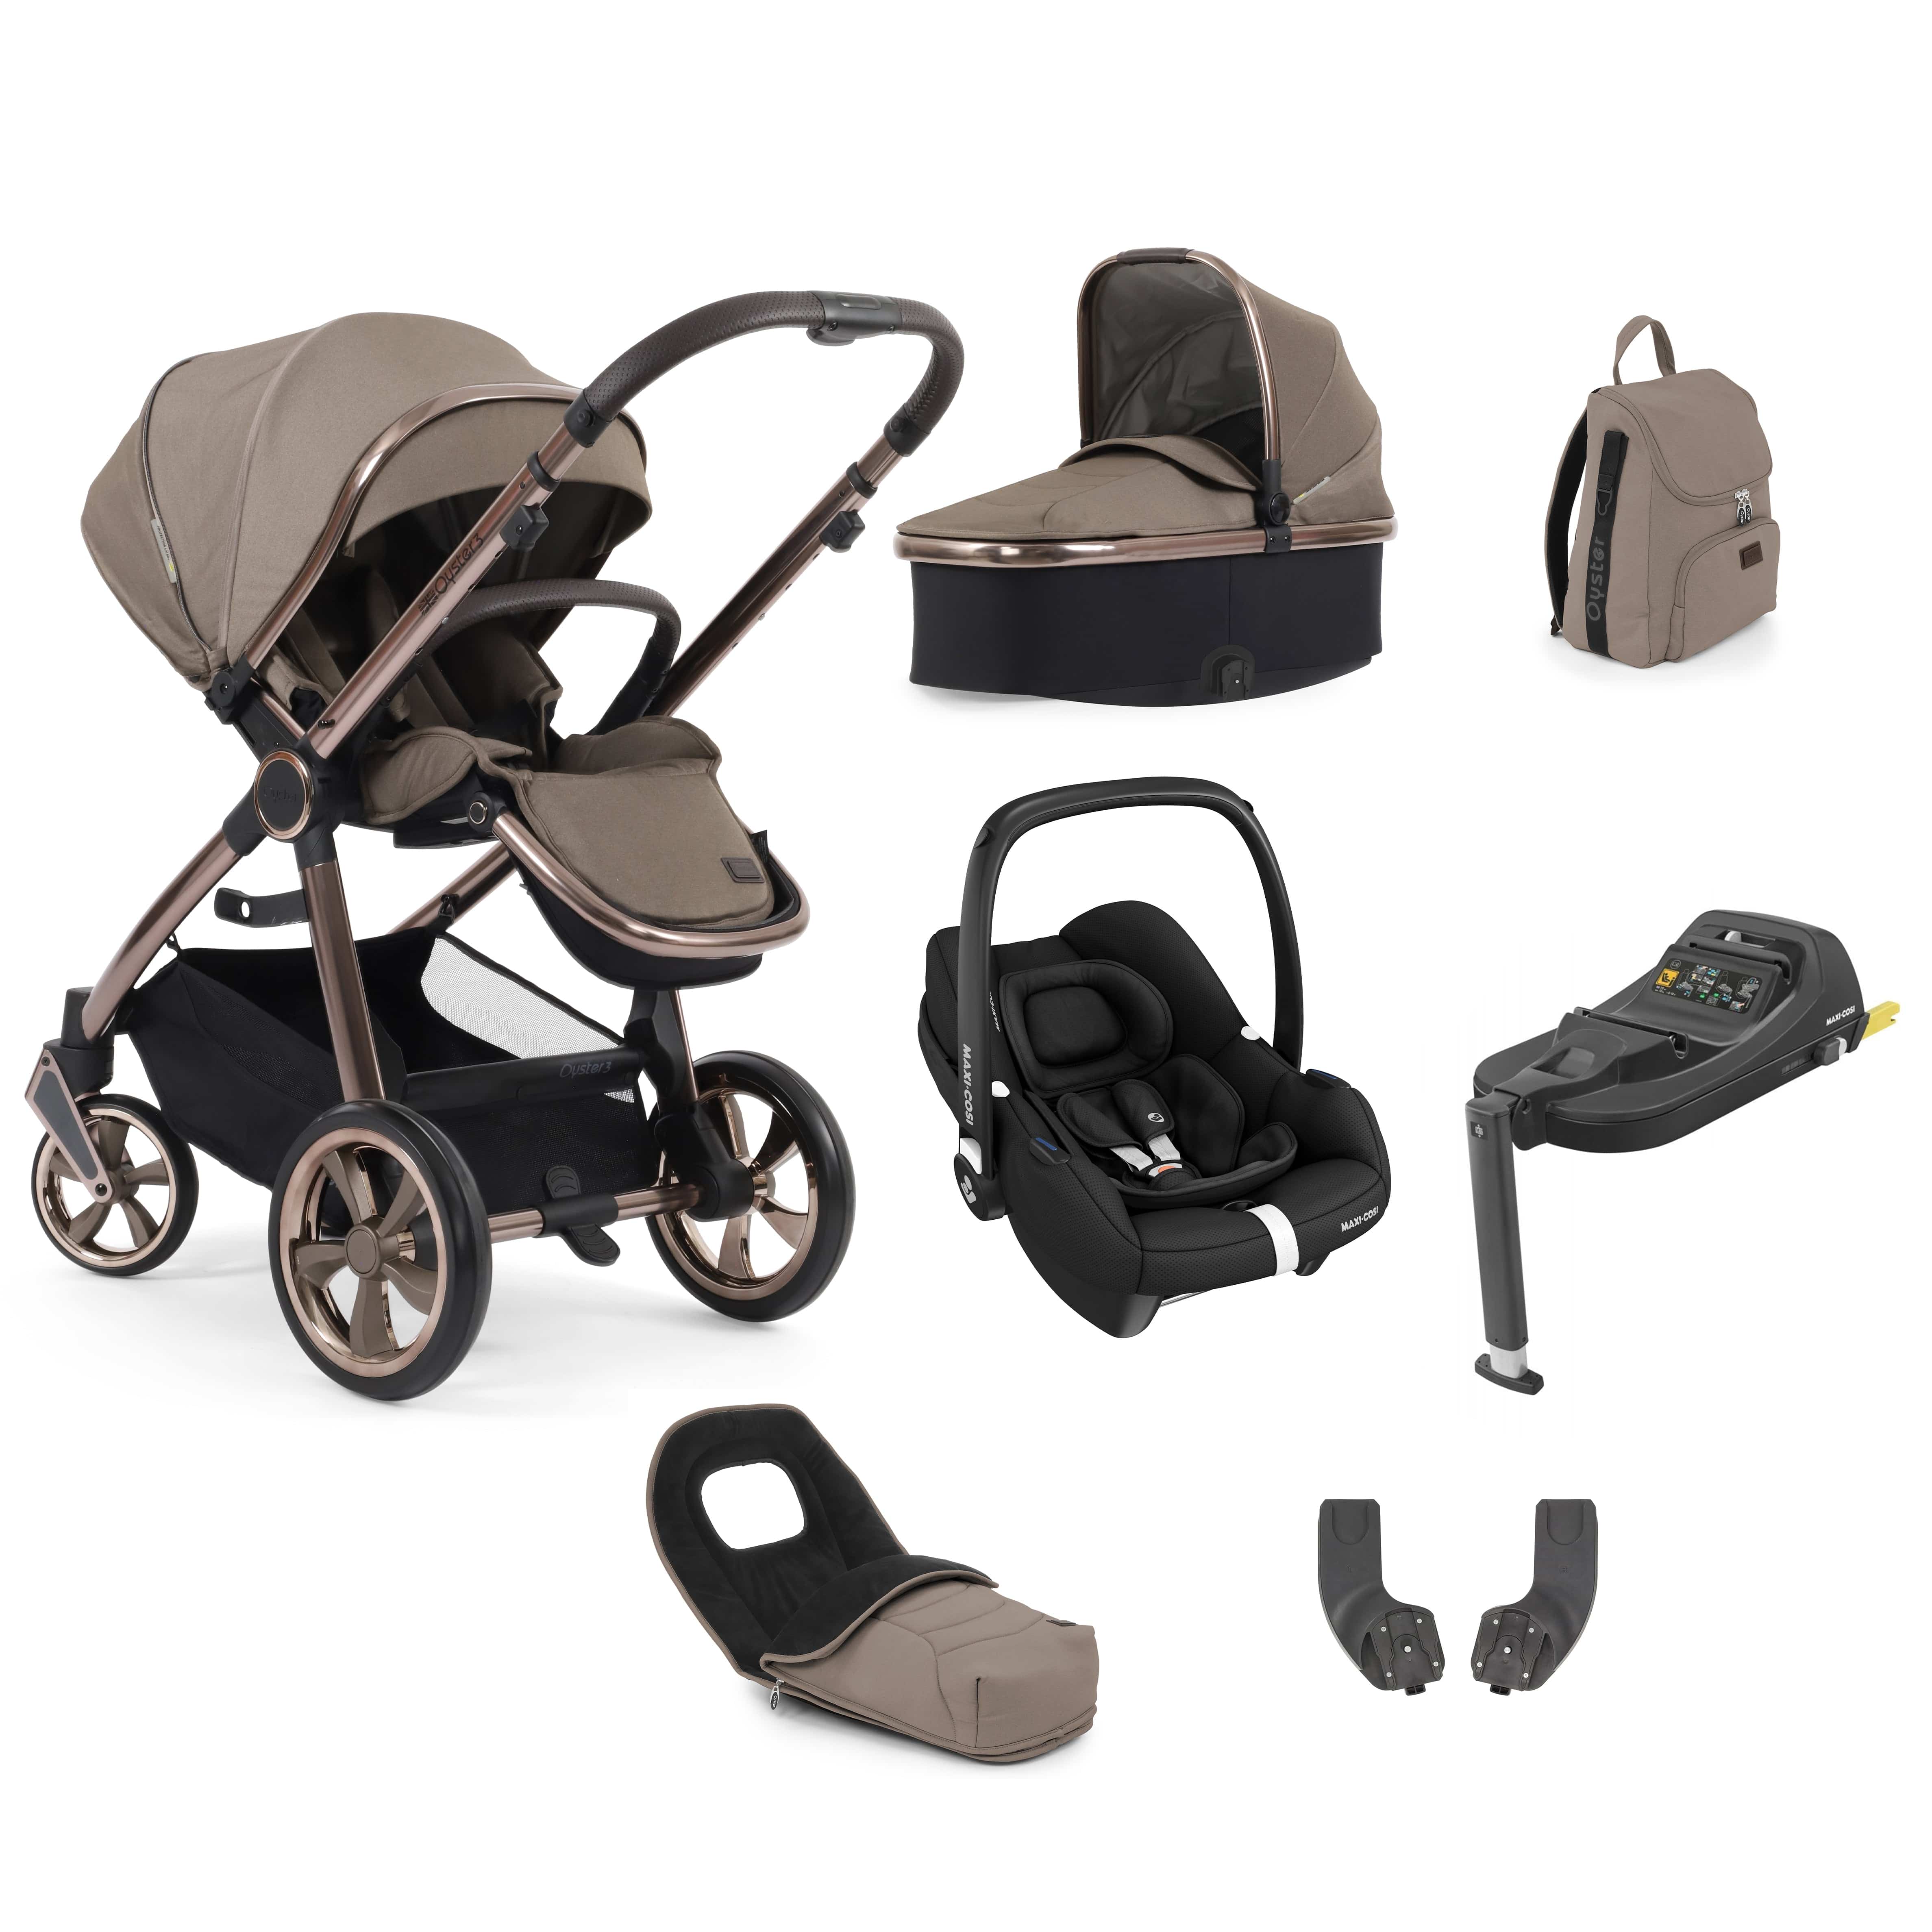 BabyStyle travel systems Babystyle Oyster 3 Luxury 7 Piece with Car Seat Bundle in Mink 14814-MNK